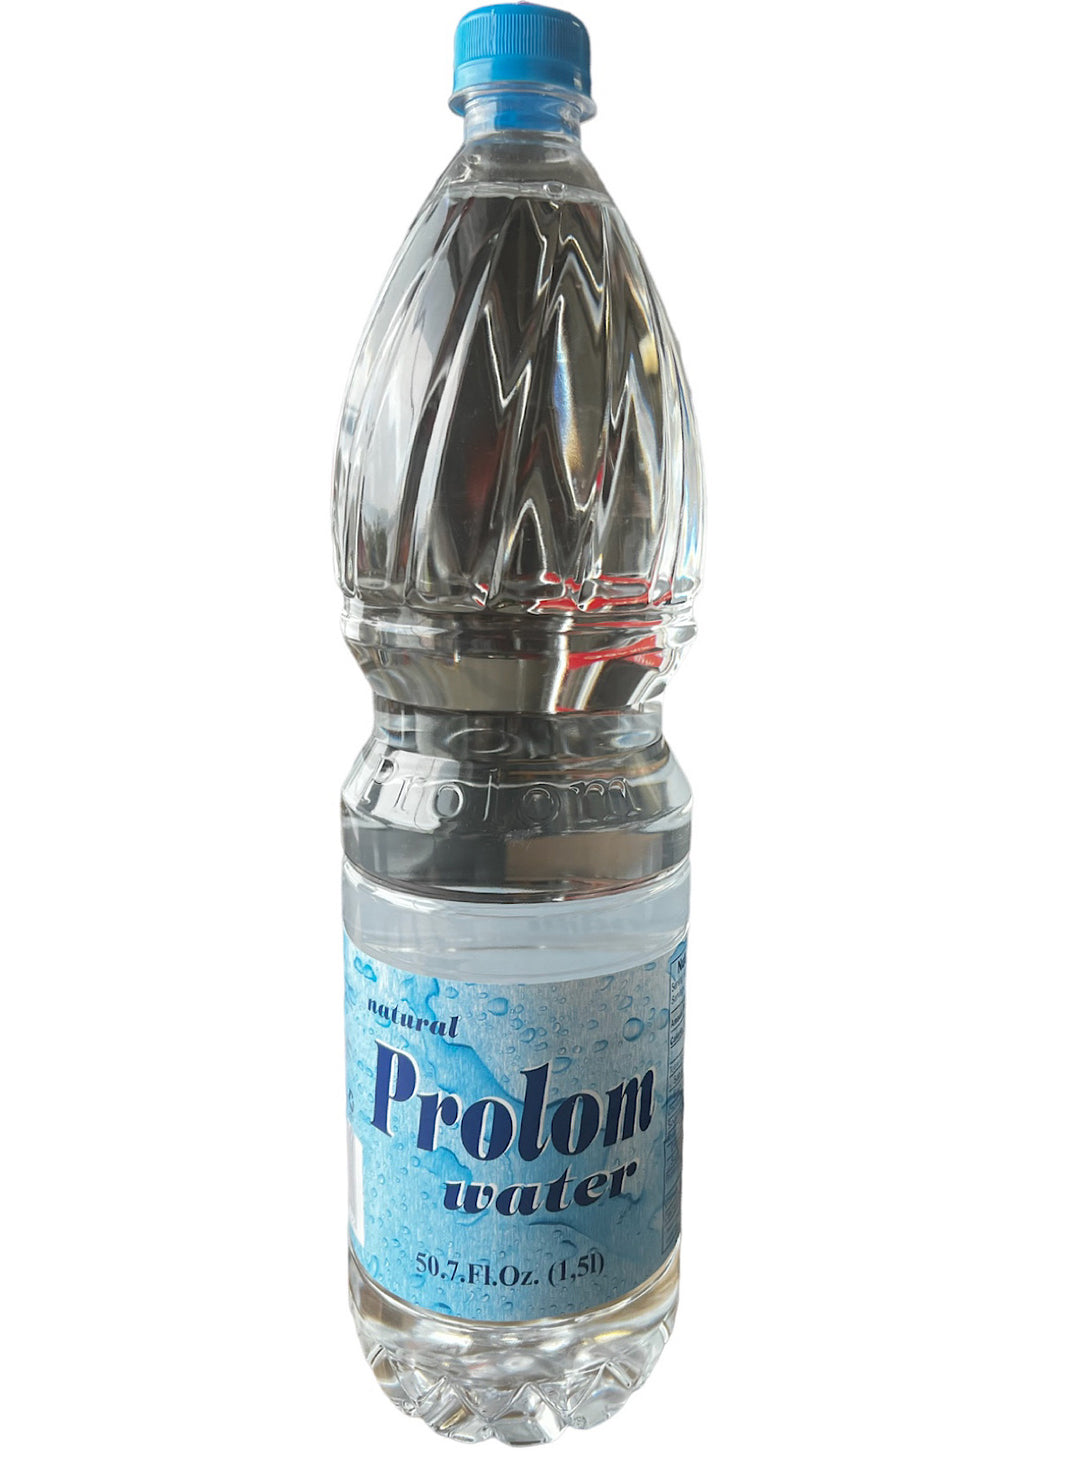 Natural Mineral Water - Prolom - 1.5 Liters